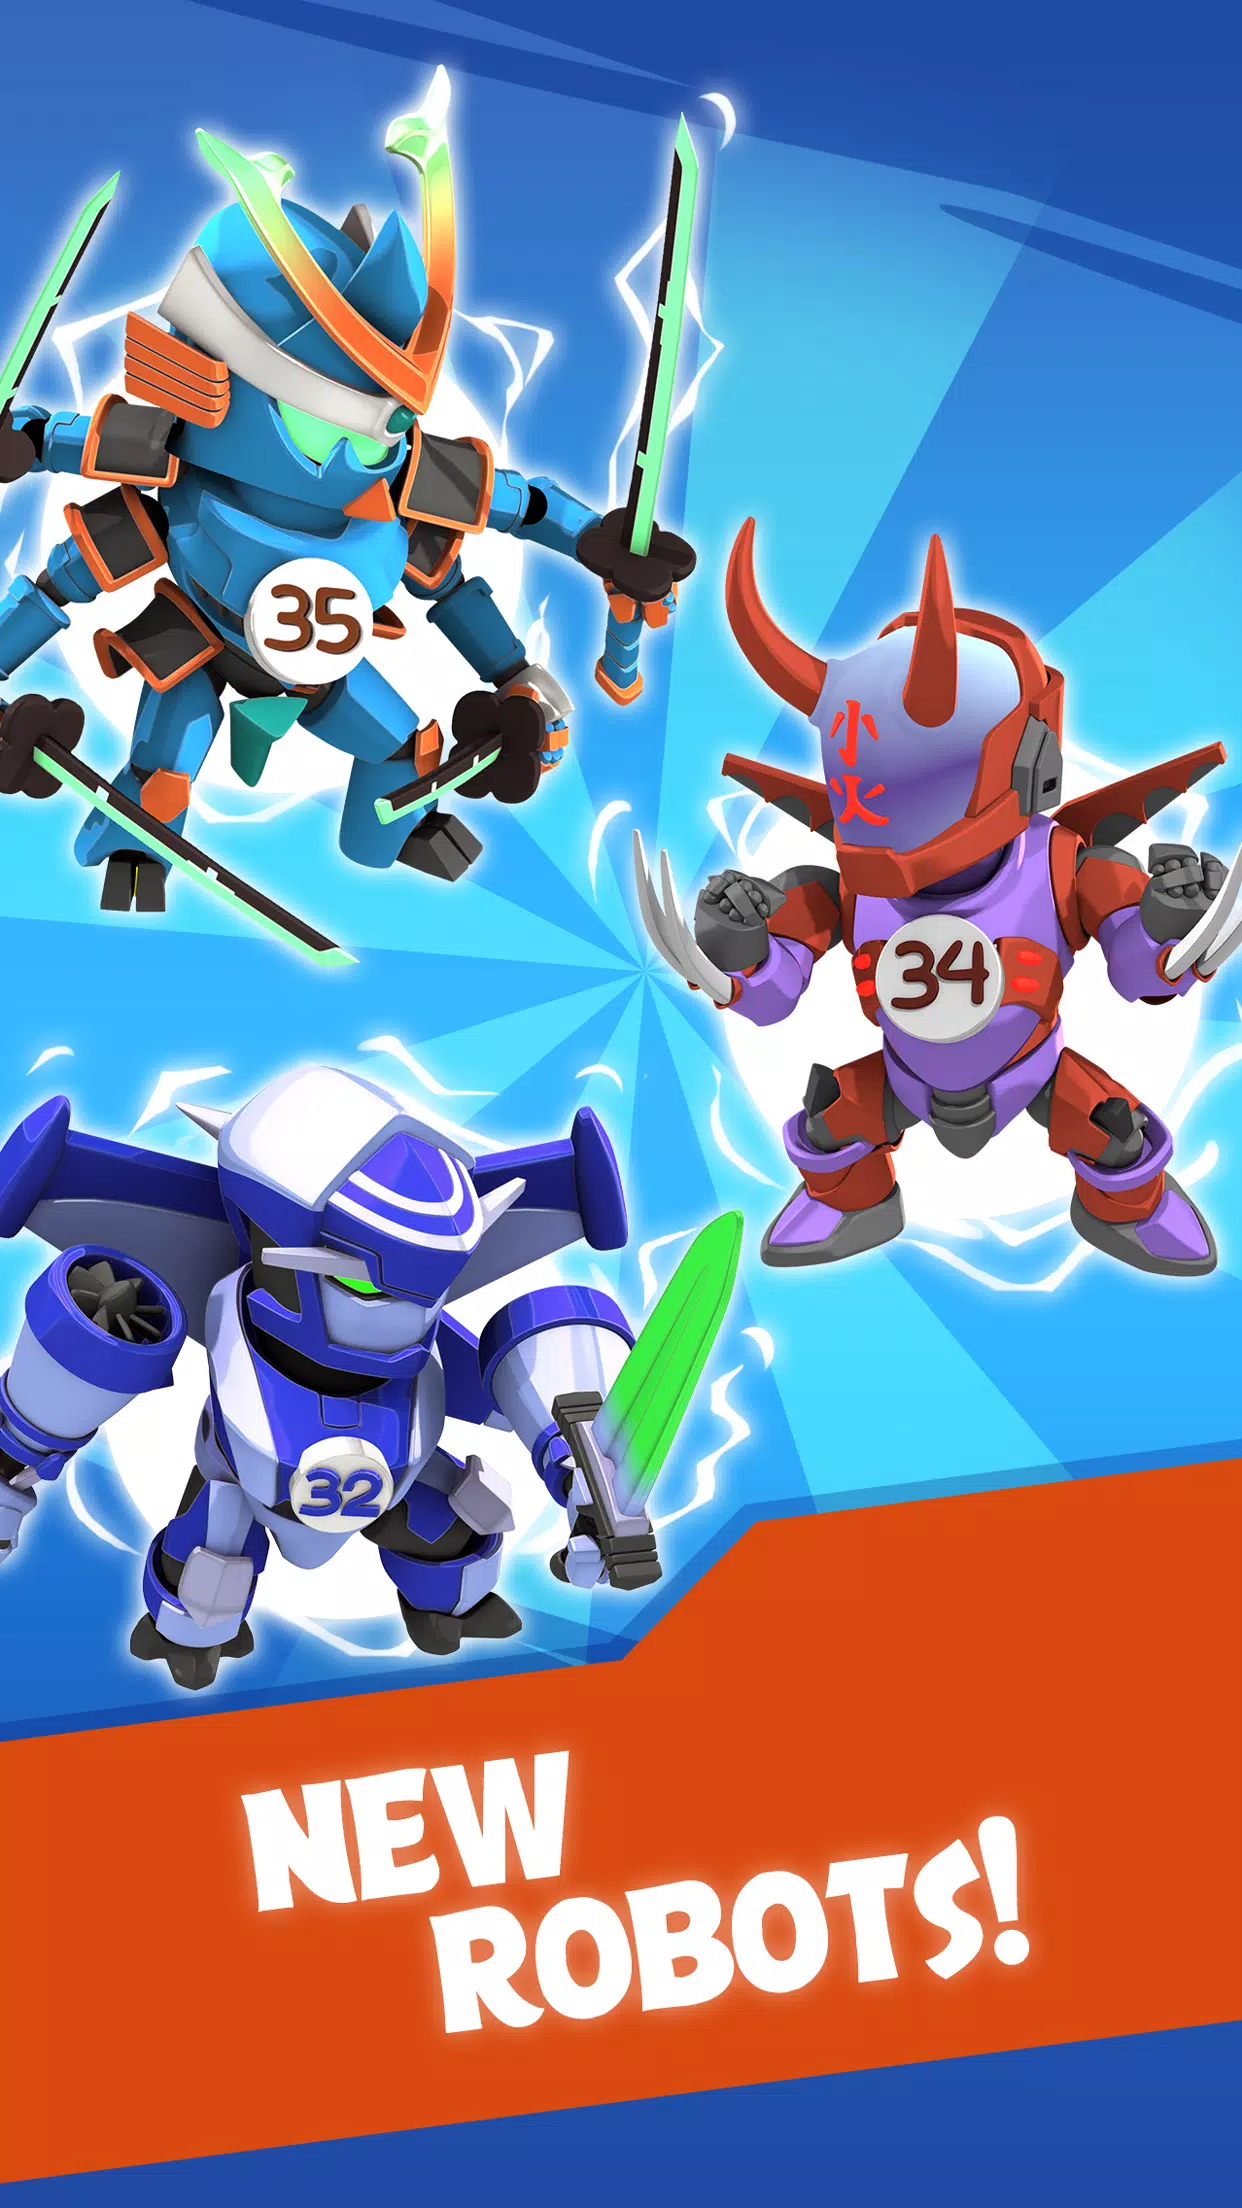 Tải Xuống Apk Merge Plane Robots - Idle Game Cho Android